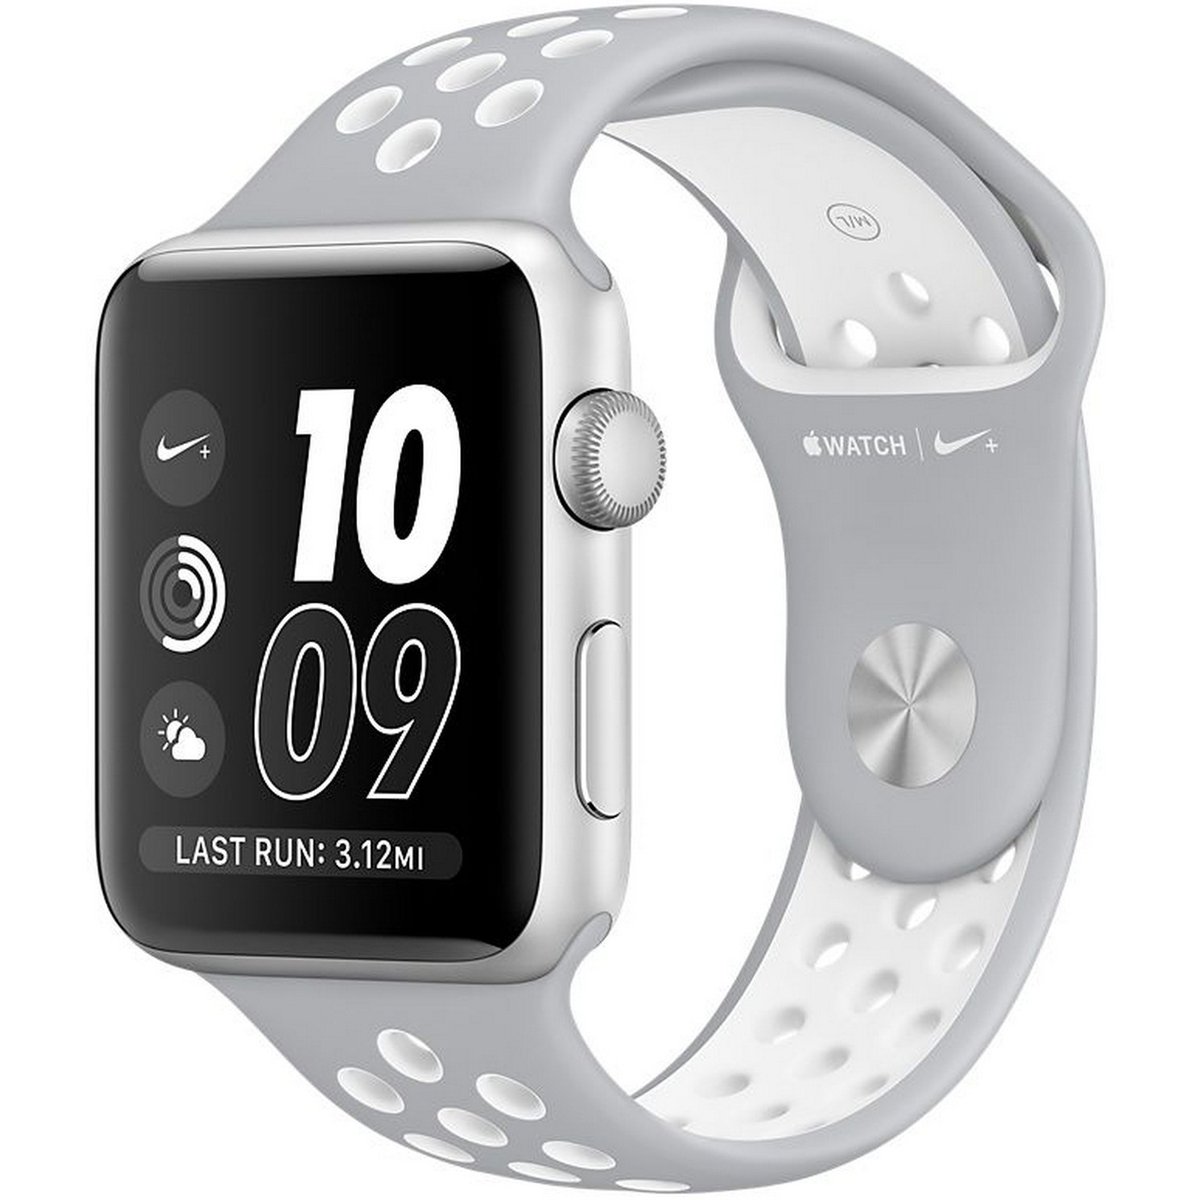 Apple Watch Series 2 Nike+ MNNQ2 38mm Silver Aluminum Case with Flat Silver/White Nike Sport Band